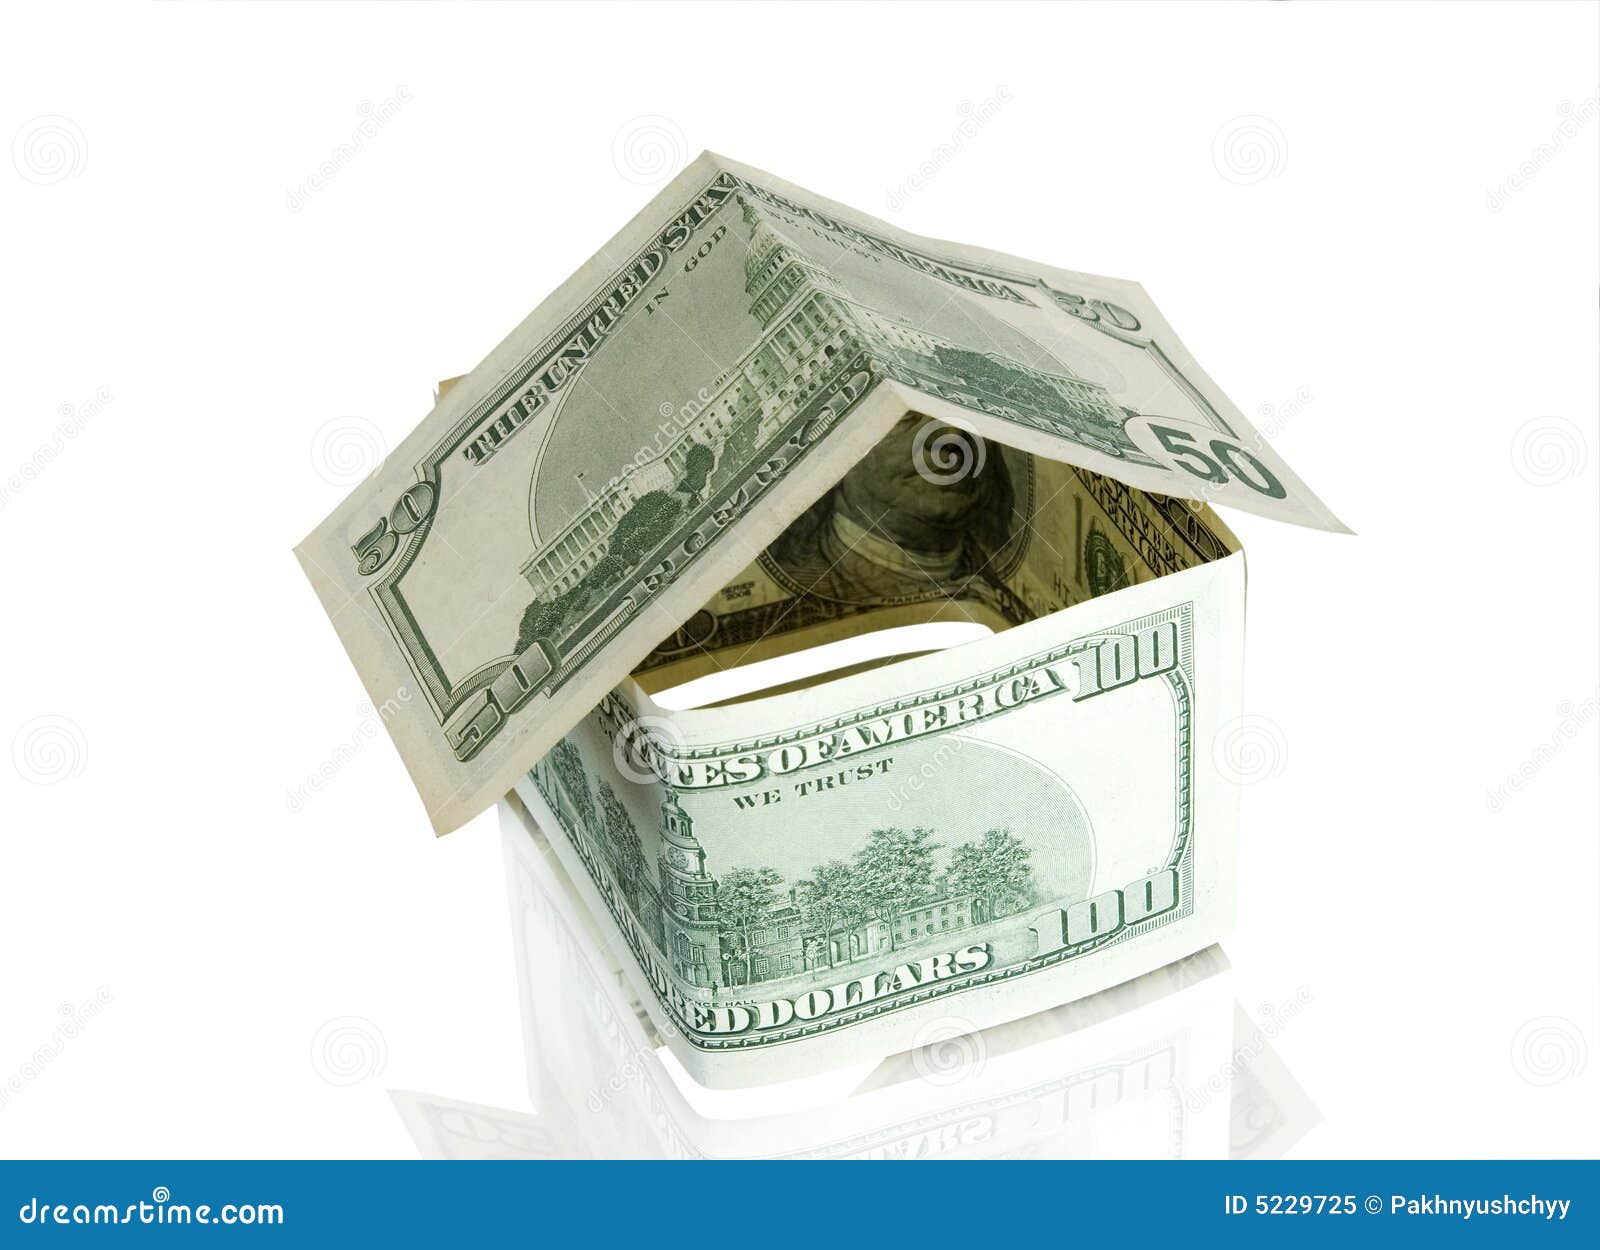 Home from money stock image. Image of house, money, building - 5229725